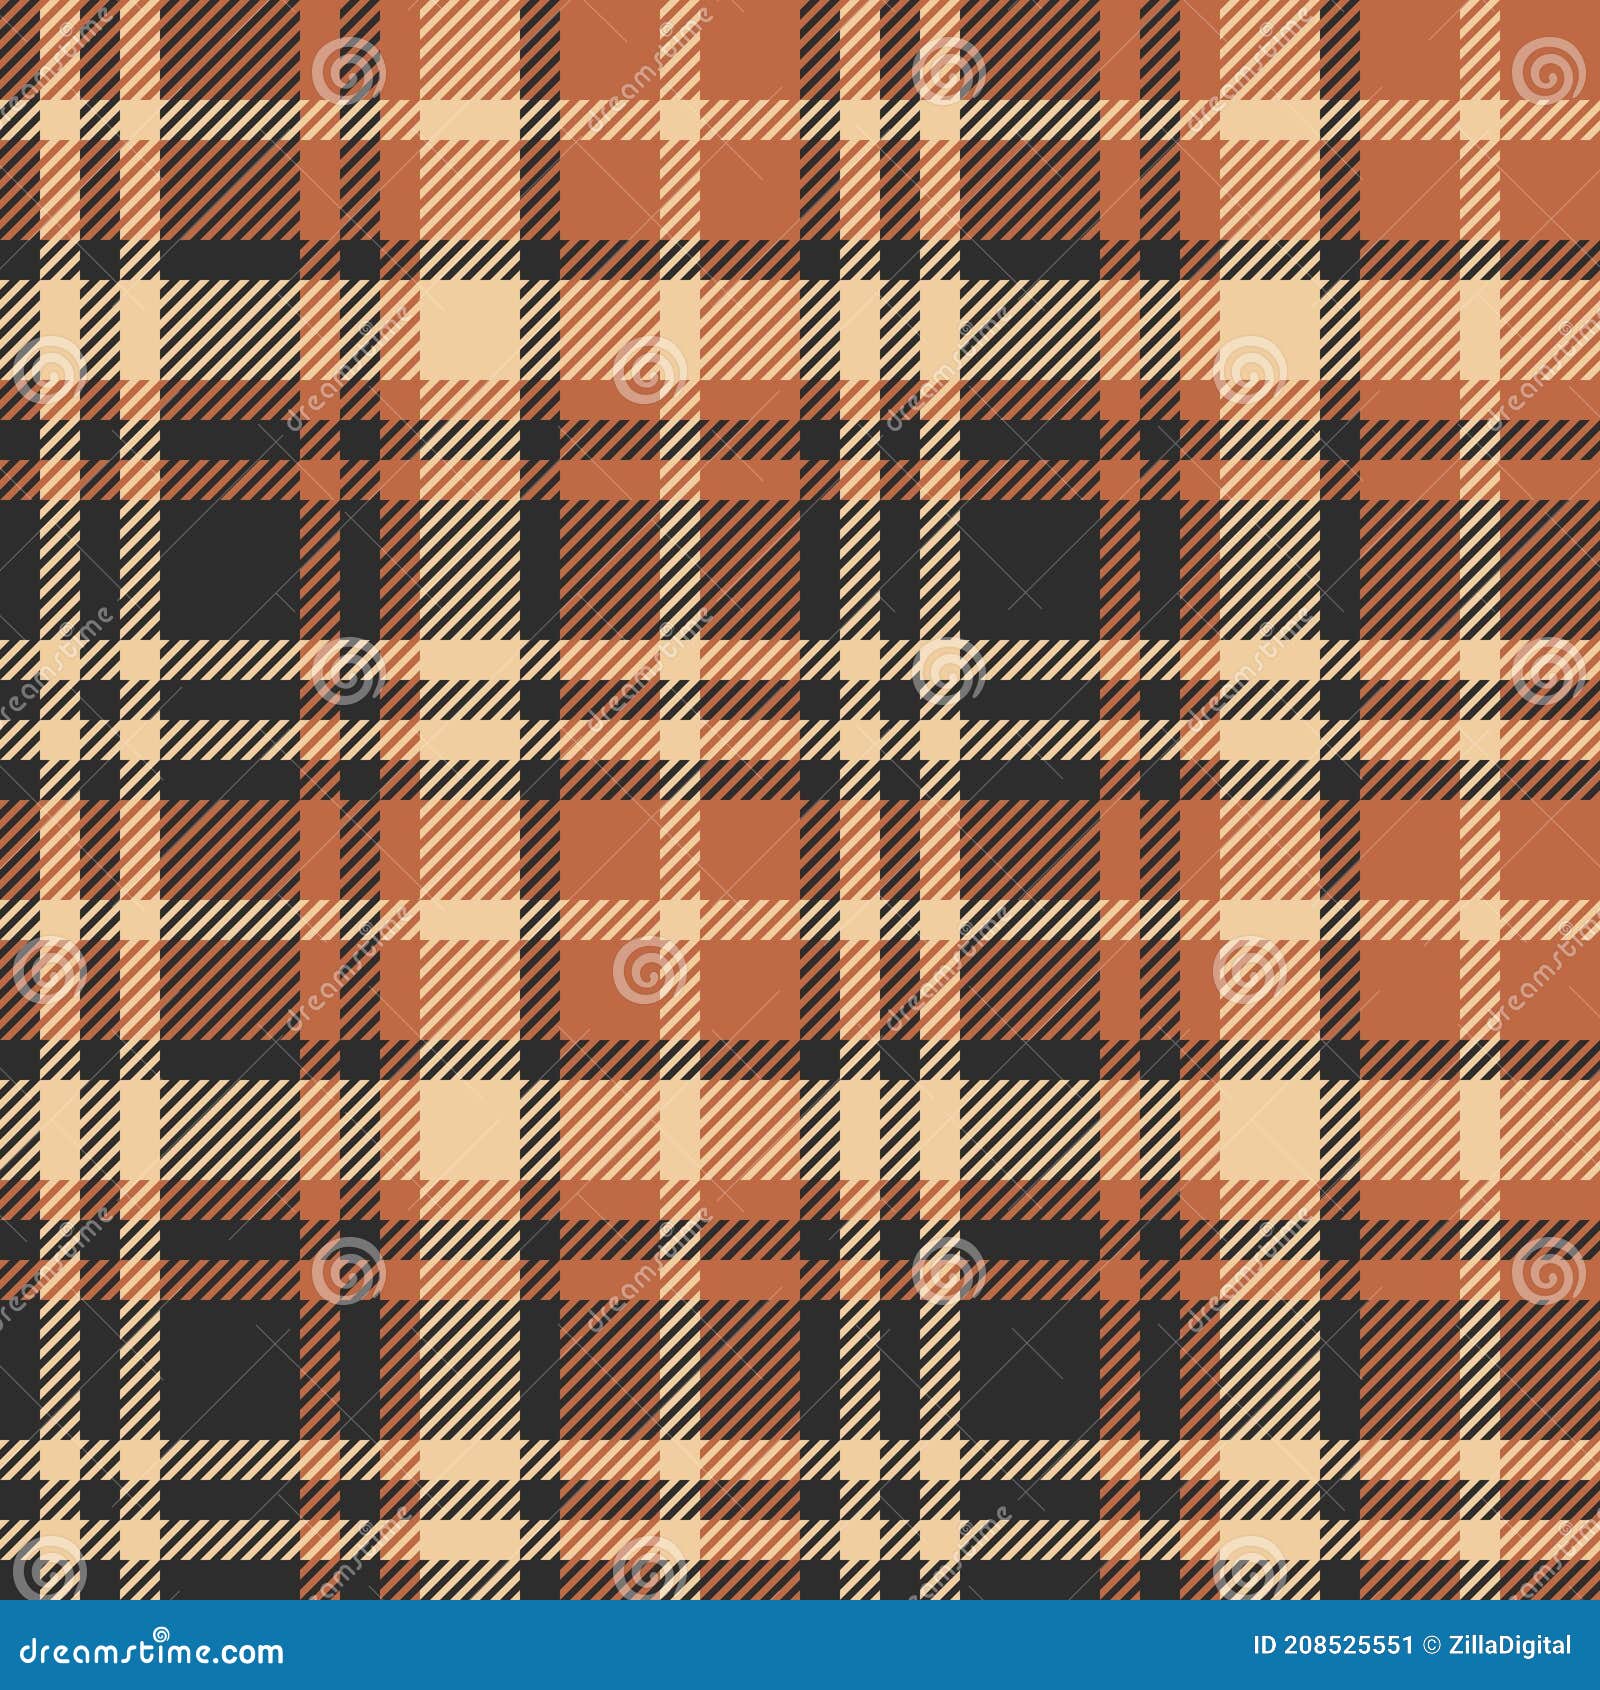 Plaid Pattern in Brown, Orange, Beige. Seamless Vector Background Texture.  Tartan Check Plaid for Flannel Shirt, Skirt, Blanket. Stock Vector -  Illustration of scotland, material: 208525551